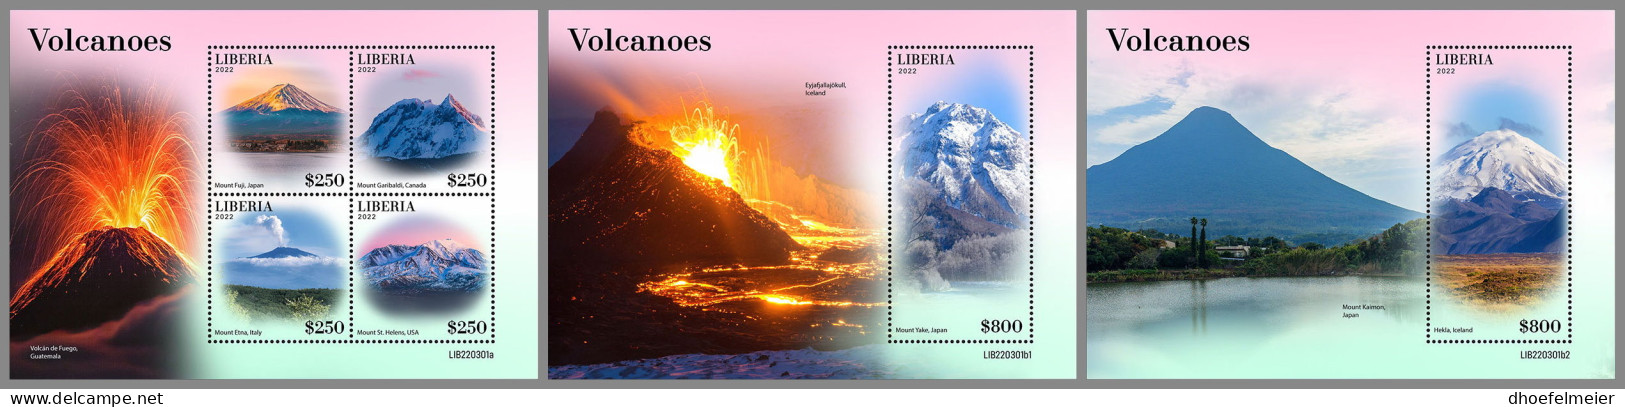 LIBERIA 2022 MNH Volcanoes Vulkane Volcans M/S+2S/S - OFFICIAL ISSUE - DHQ2312 - Volcans